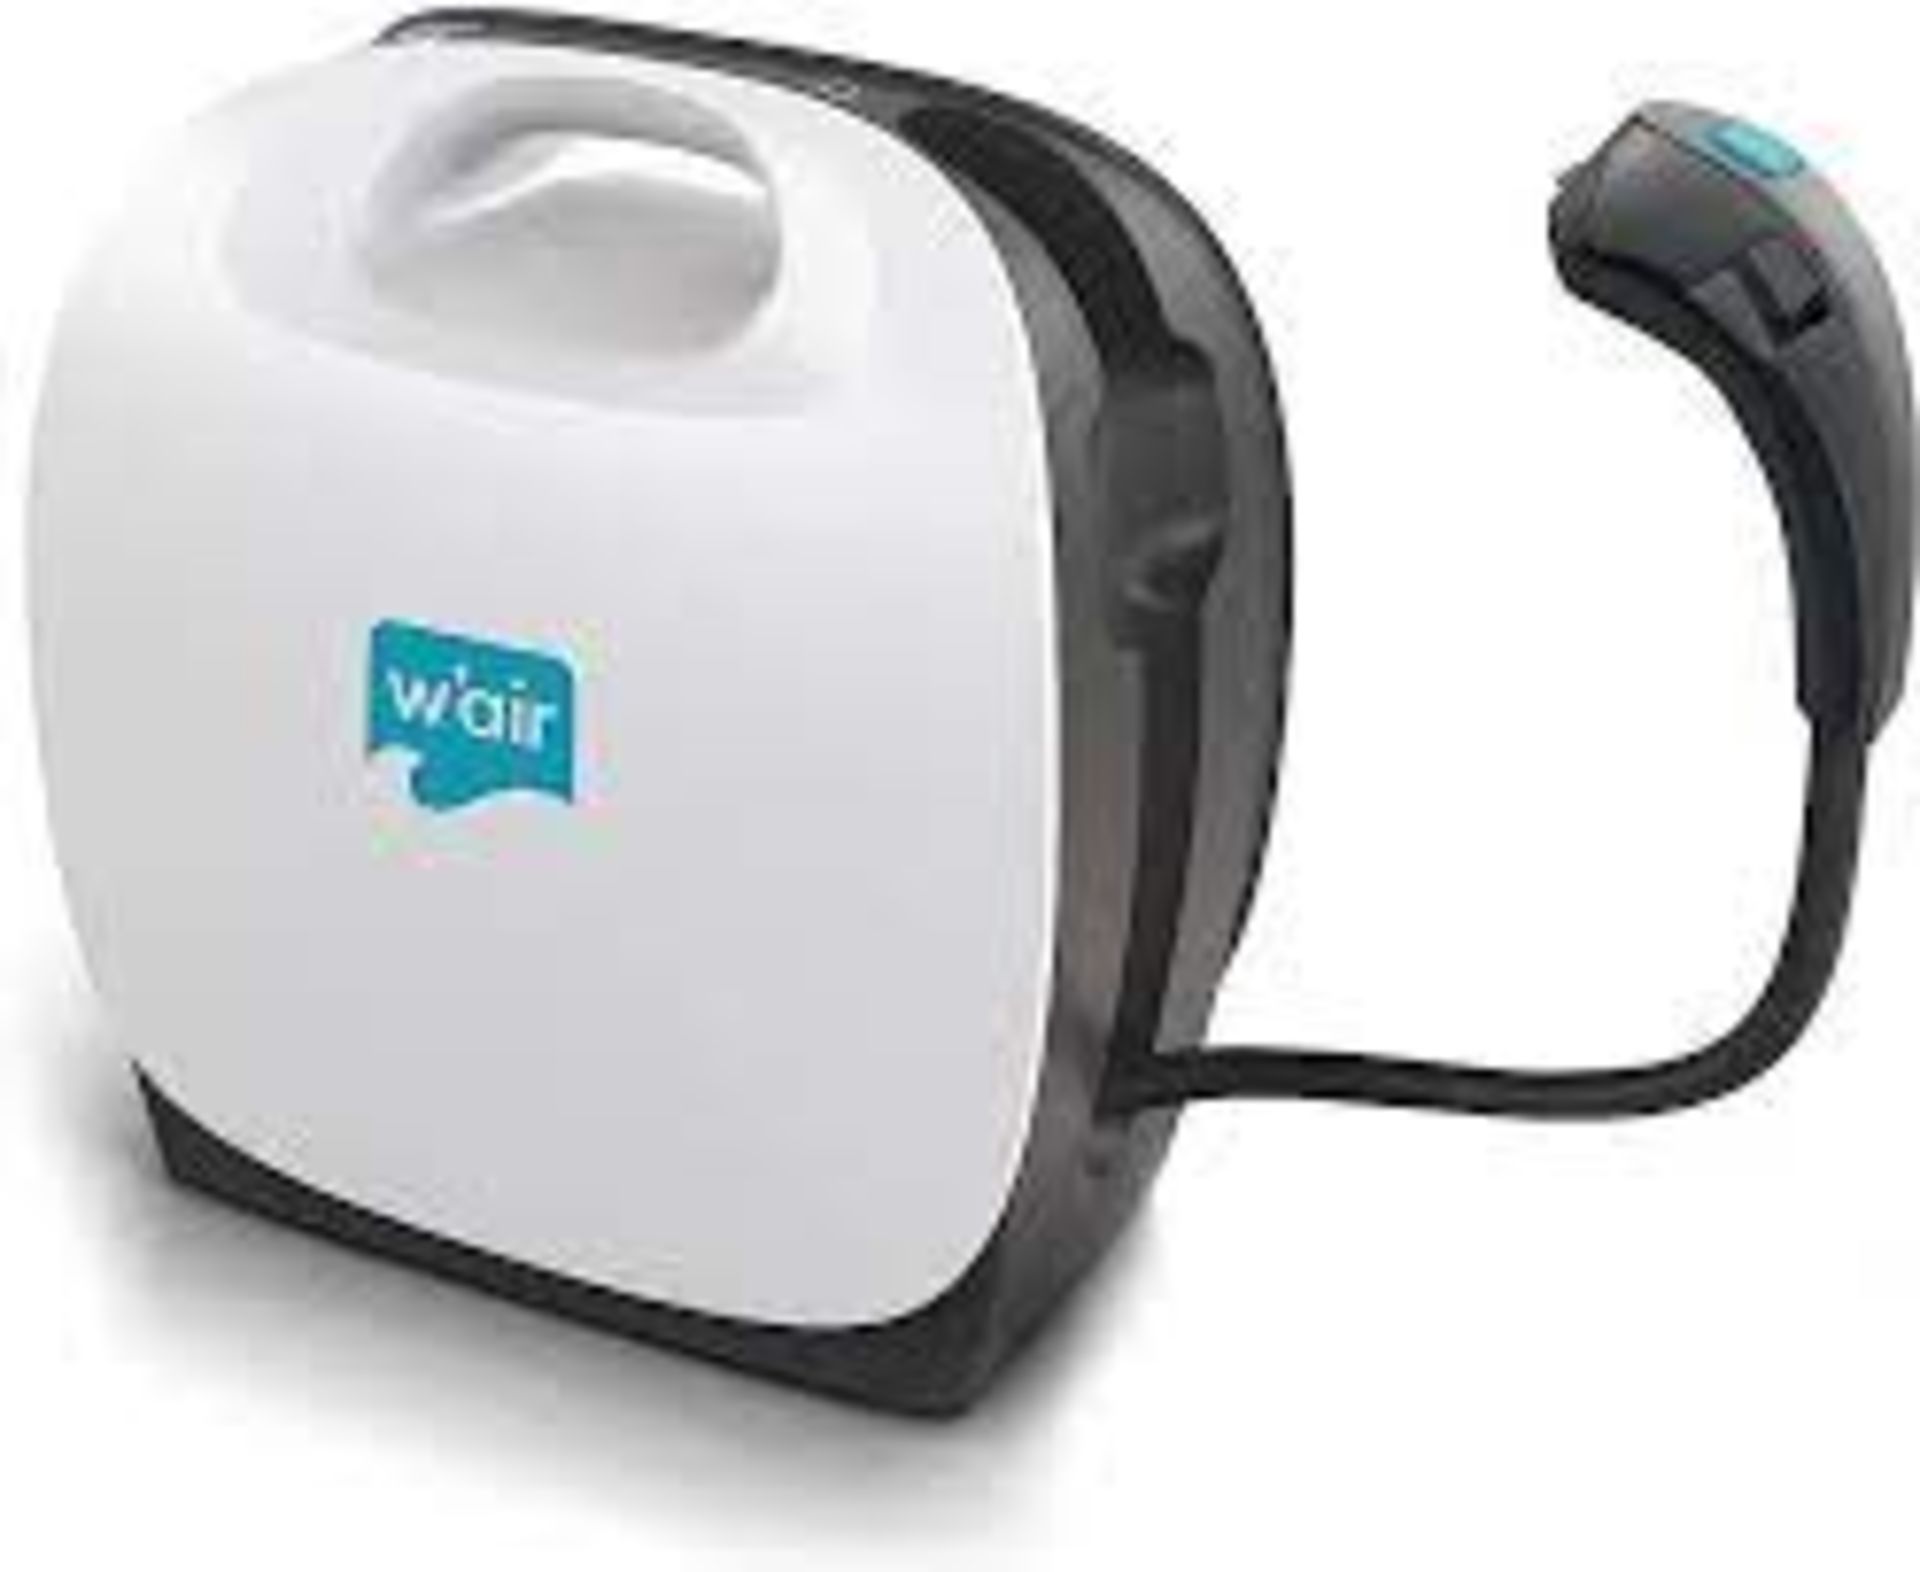 BRAND NEW W'AIR SNEAKER CLEANING SYSTEMS RRP £299, The w'air uses hydrodynamic technology - Bild 6 aus 6